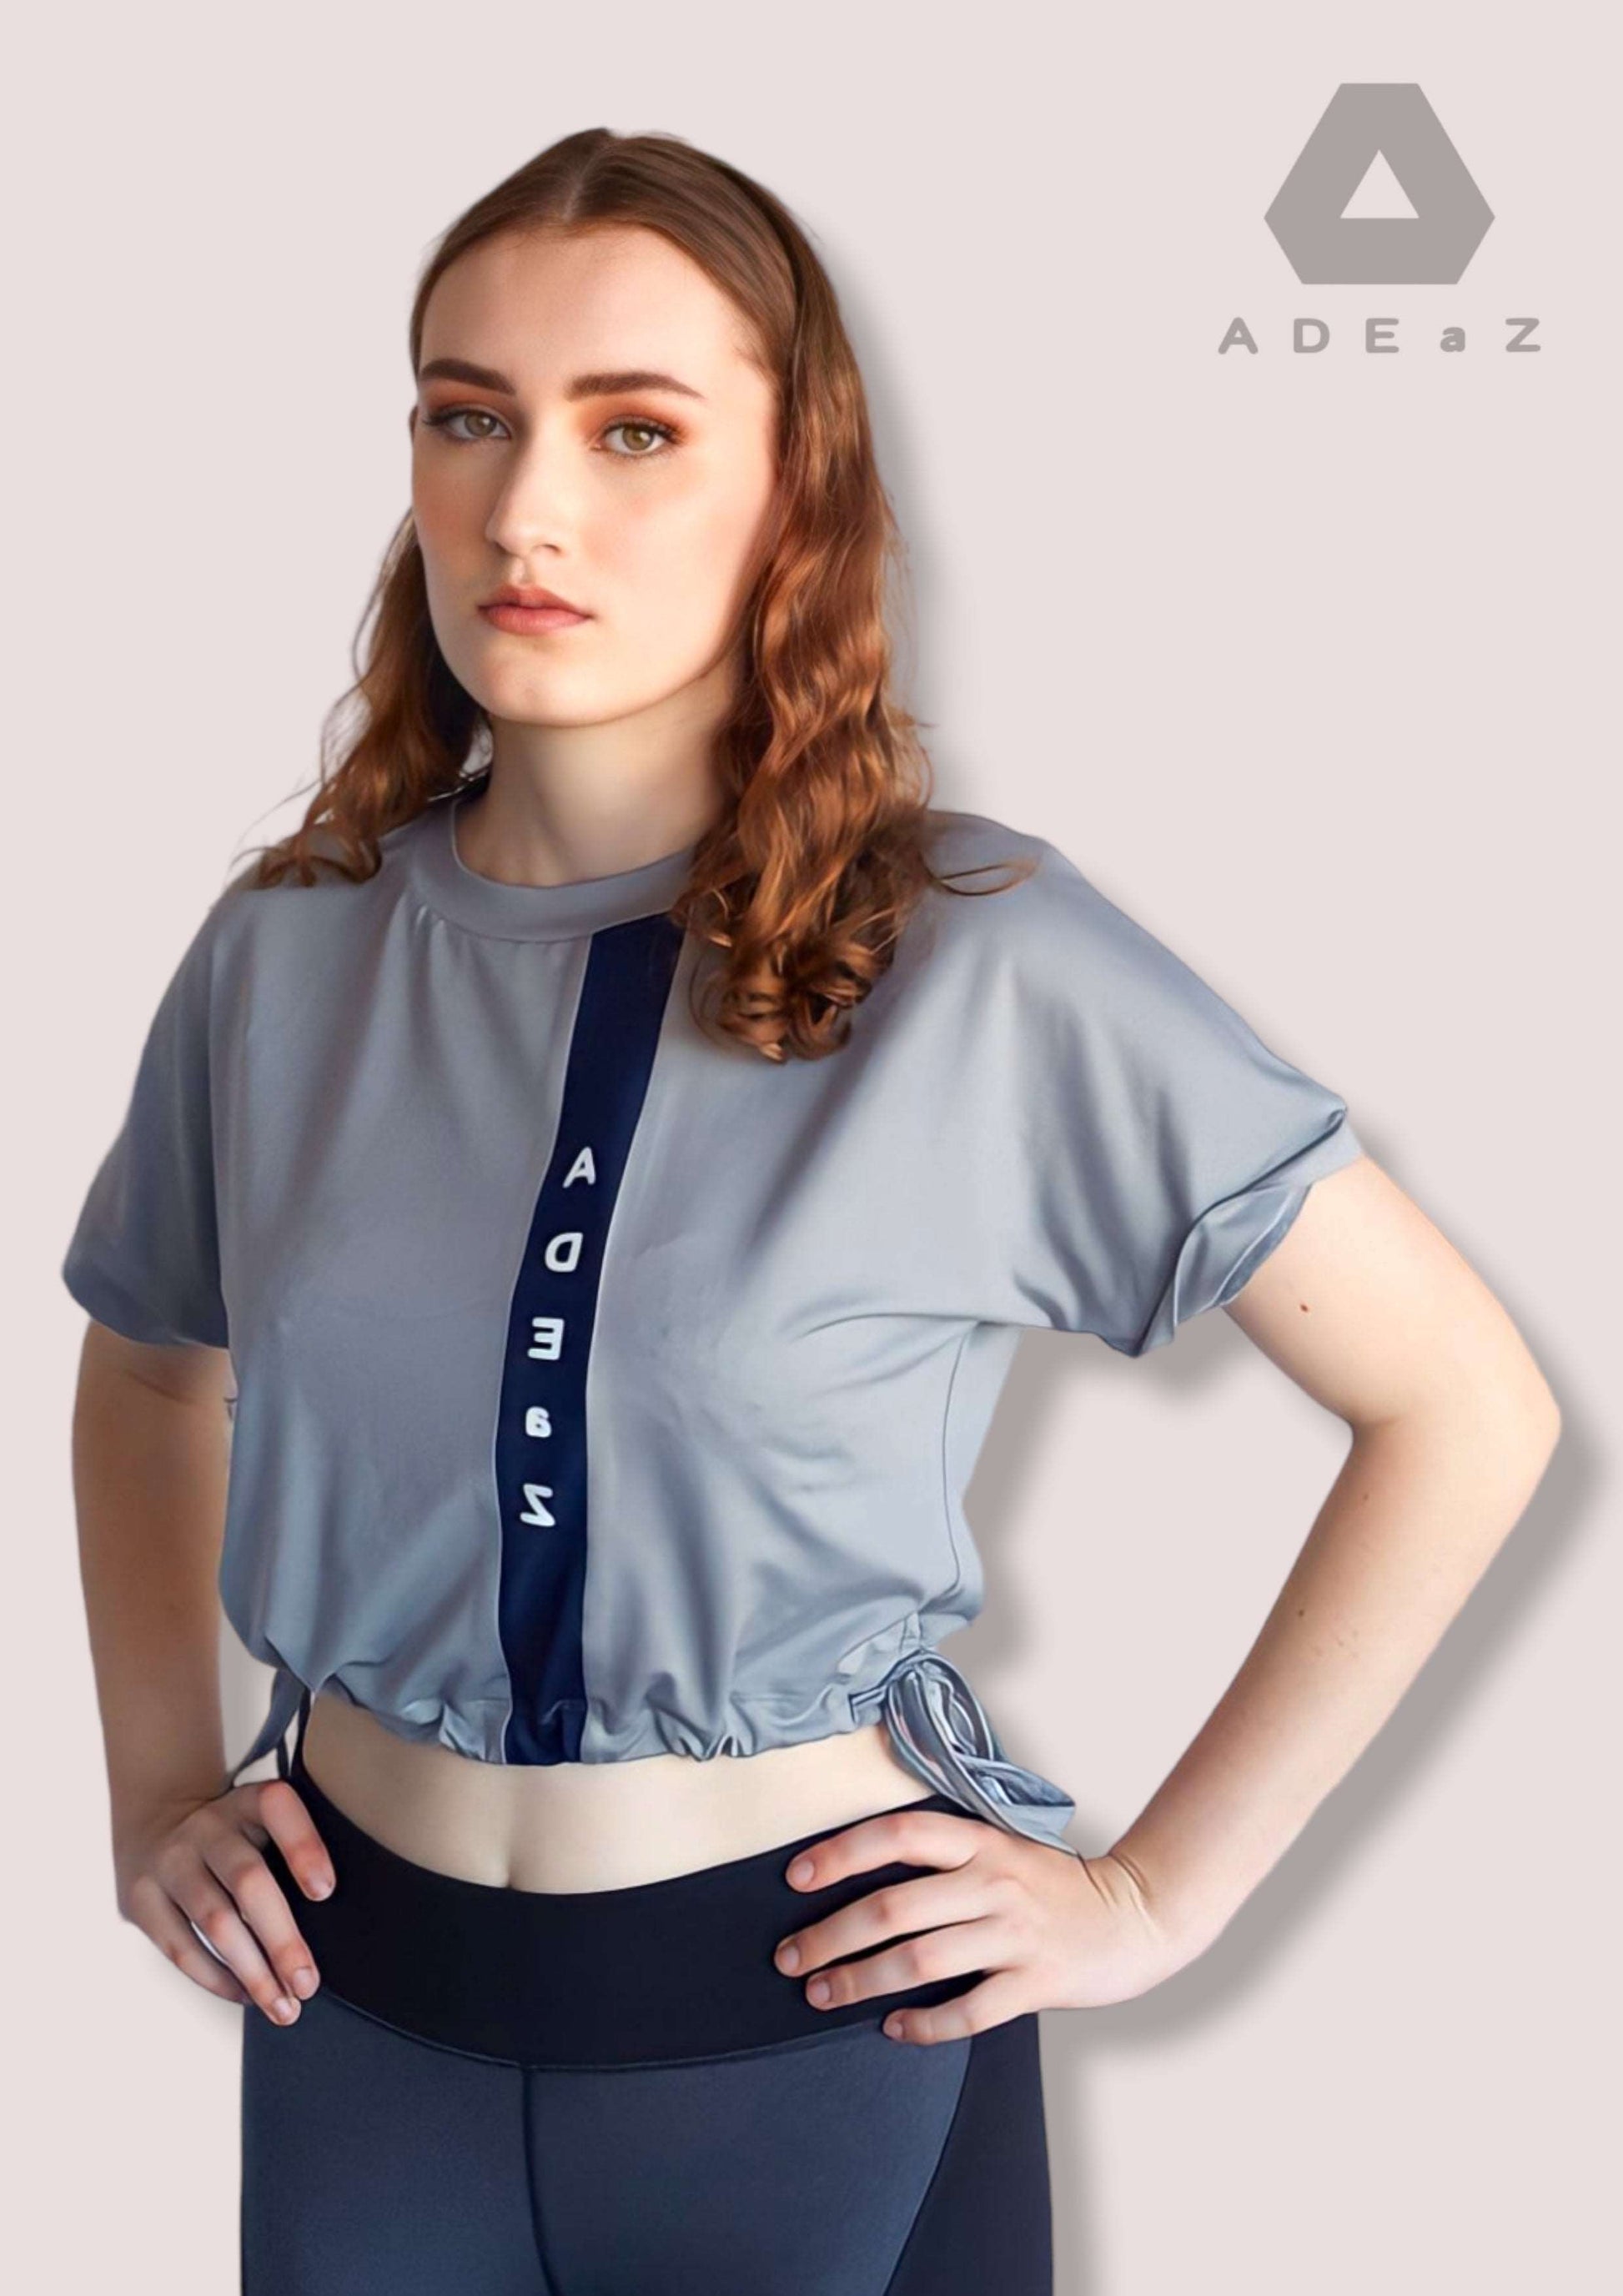 Short sleeve crop top with tie-up detail, offering a trendy and versatile style